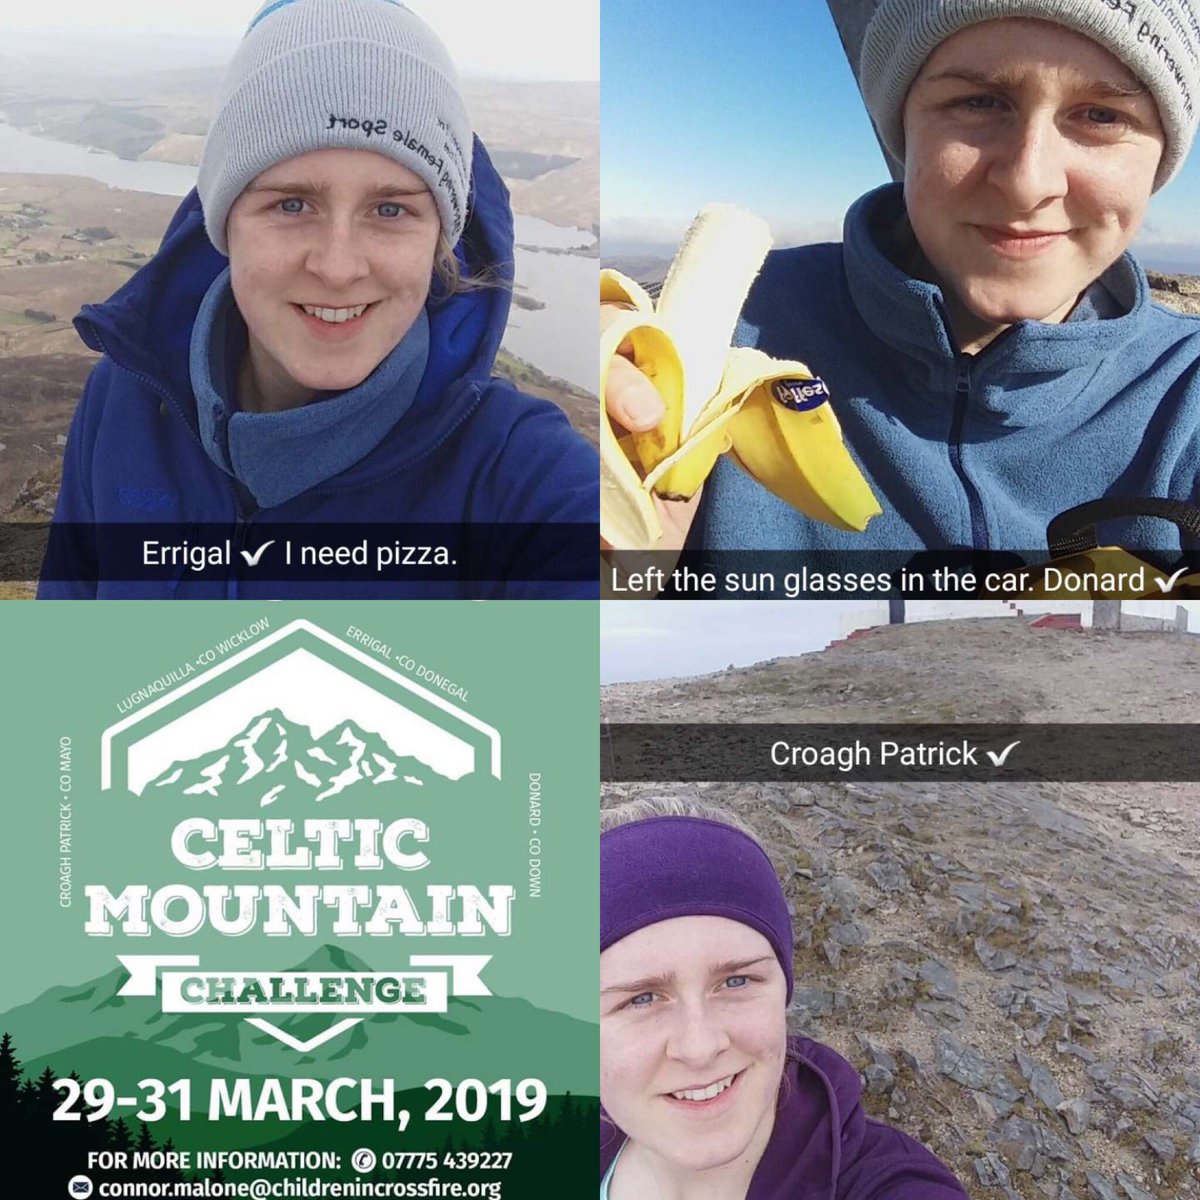 As most of us were in our beds this morning my crazy climber friend @eilis_gaeilge has just finished her third mountain in just over 24hours, one more to go and your finished #KeepHerLit #CelticMountainChallenge #CompeedAtTheReady